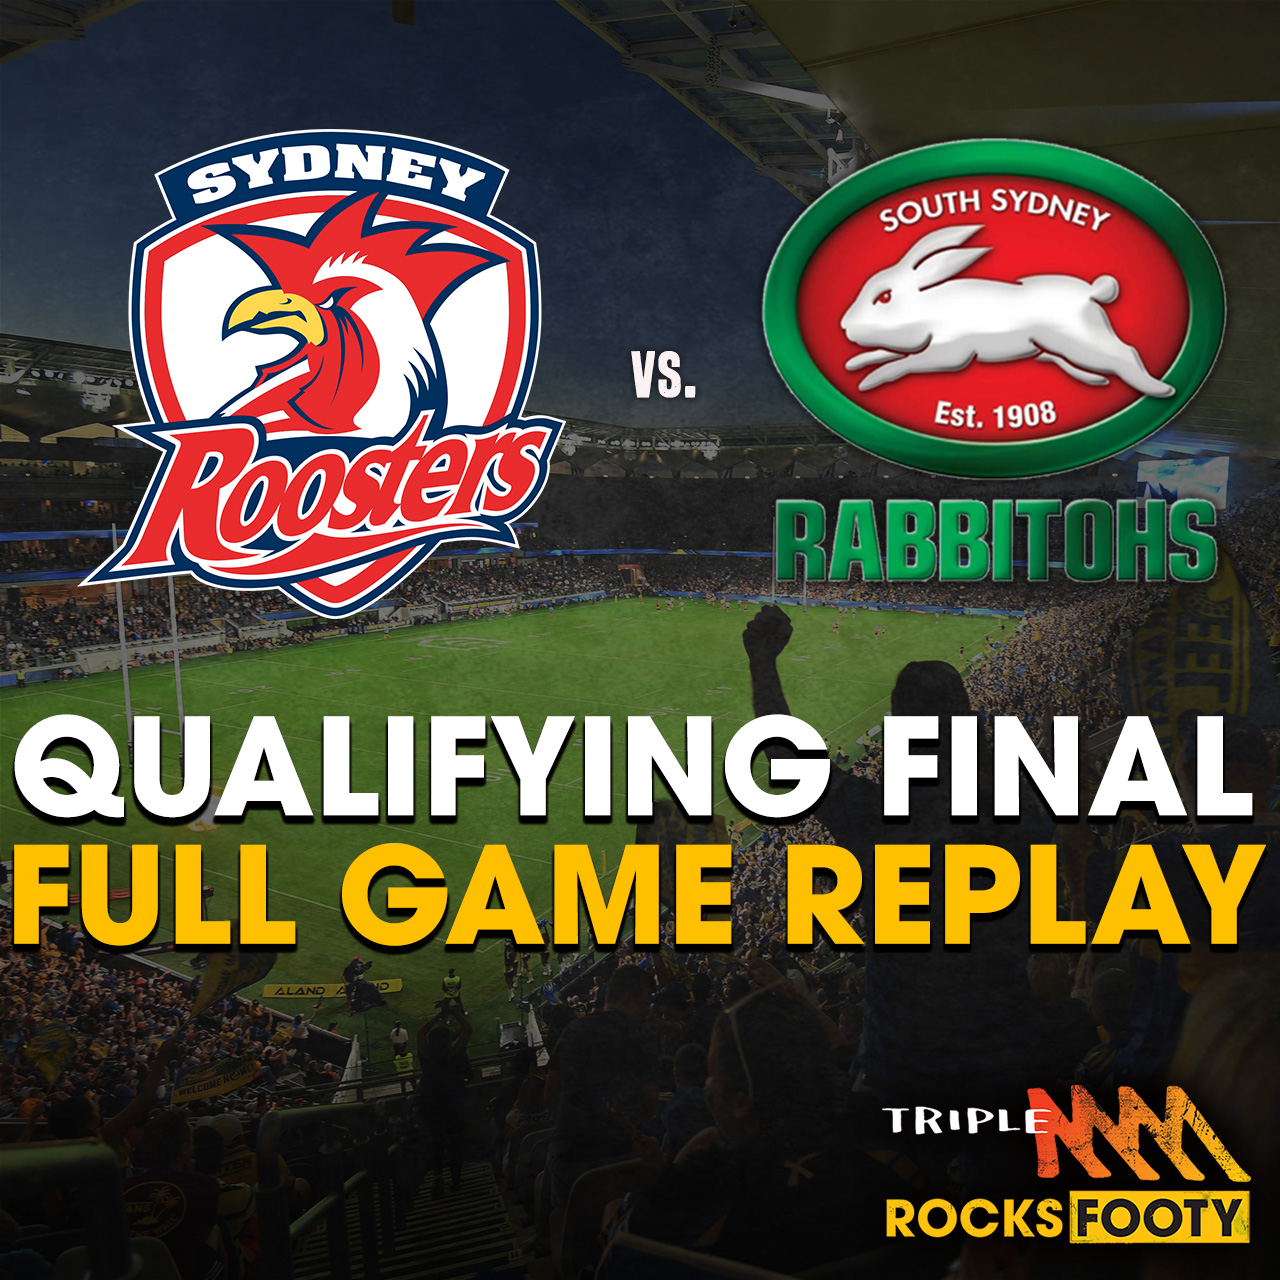 FULL GAME REPLAY | Qualifying Final: Roosters vs. Rabbitohs